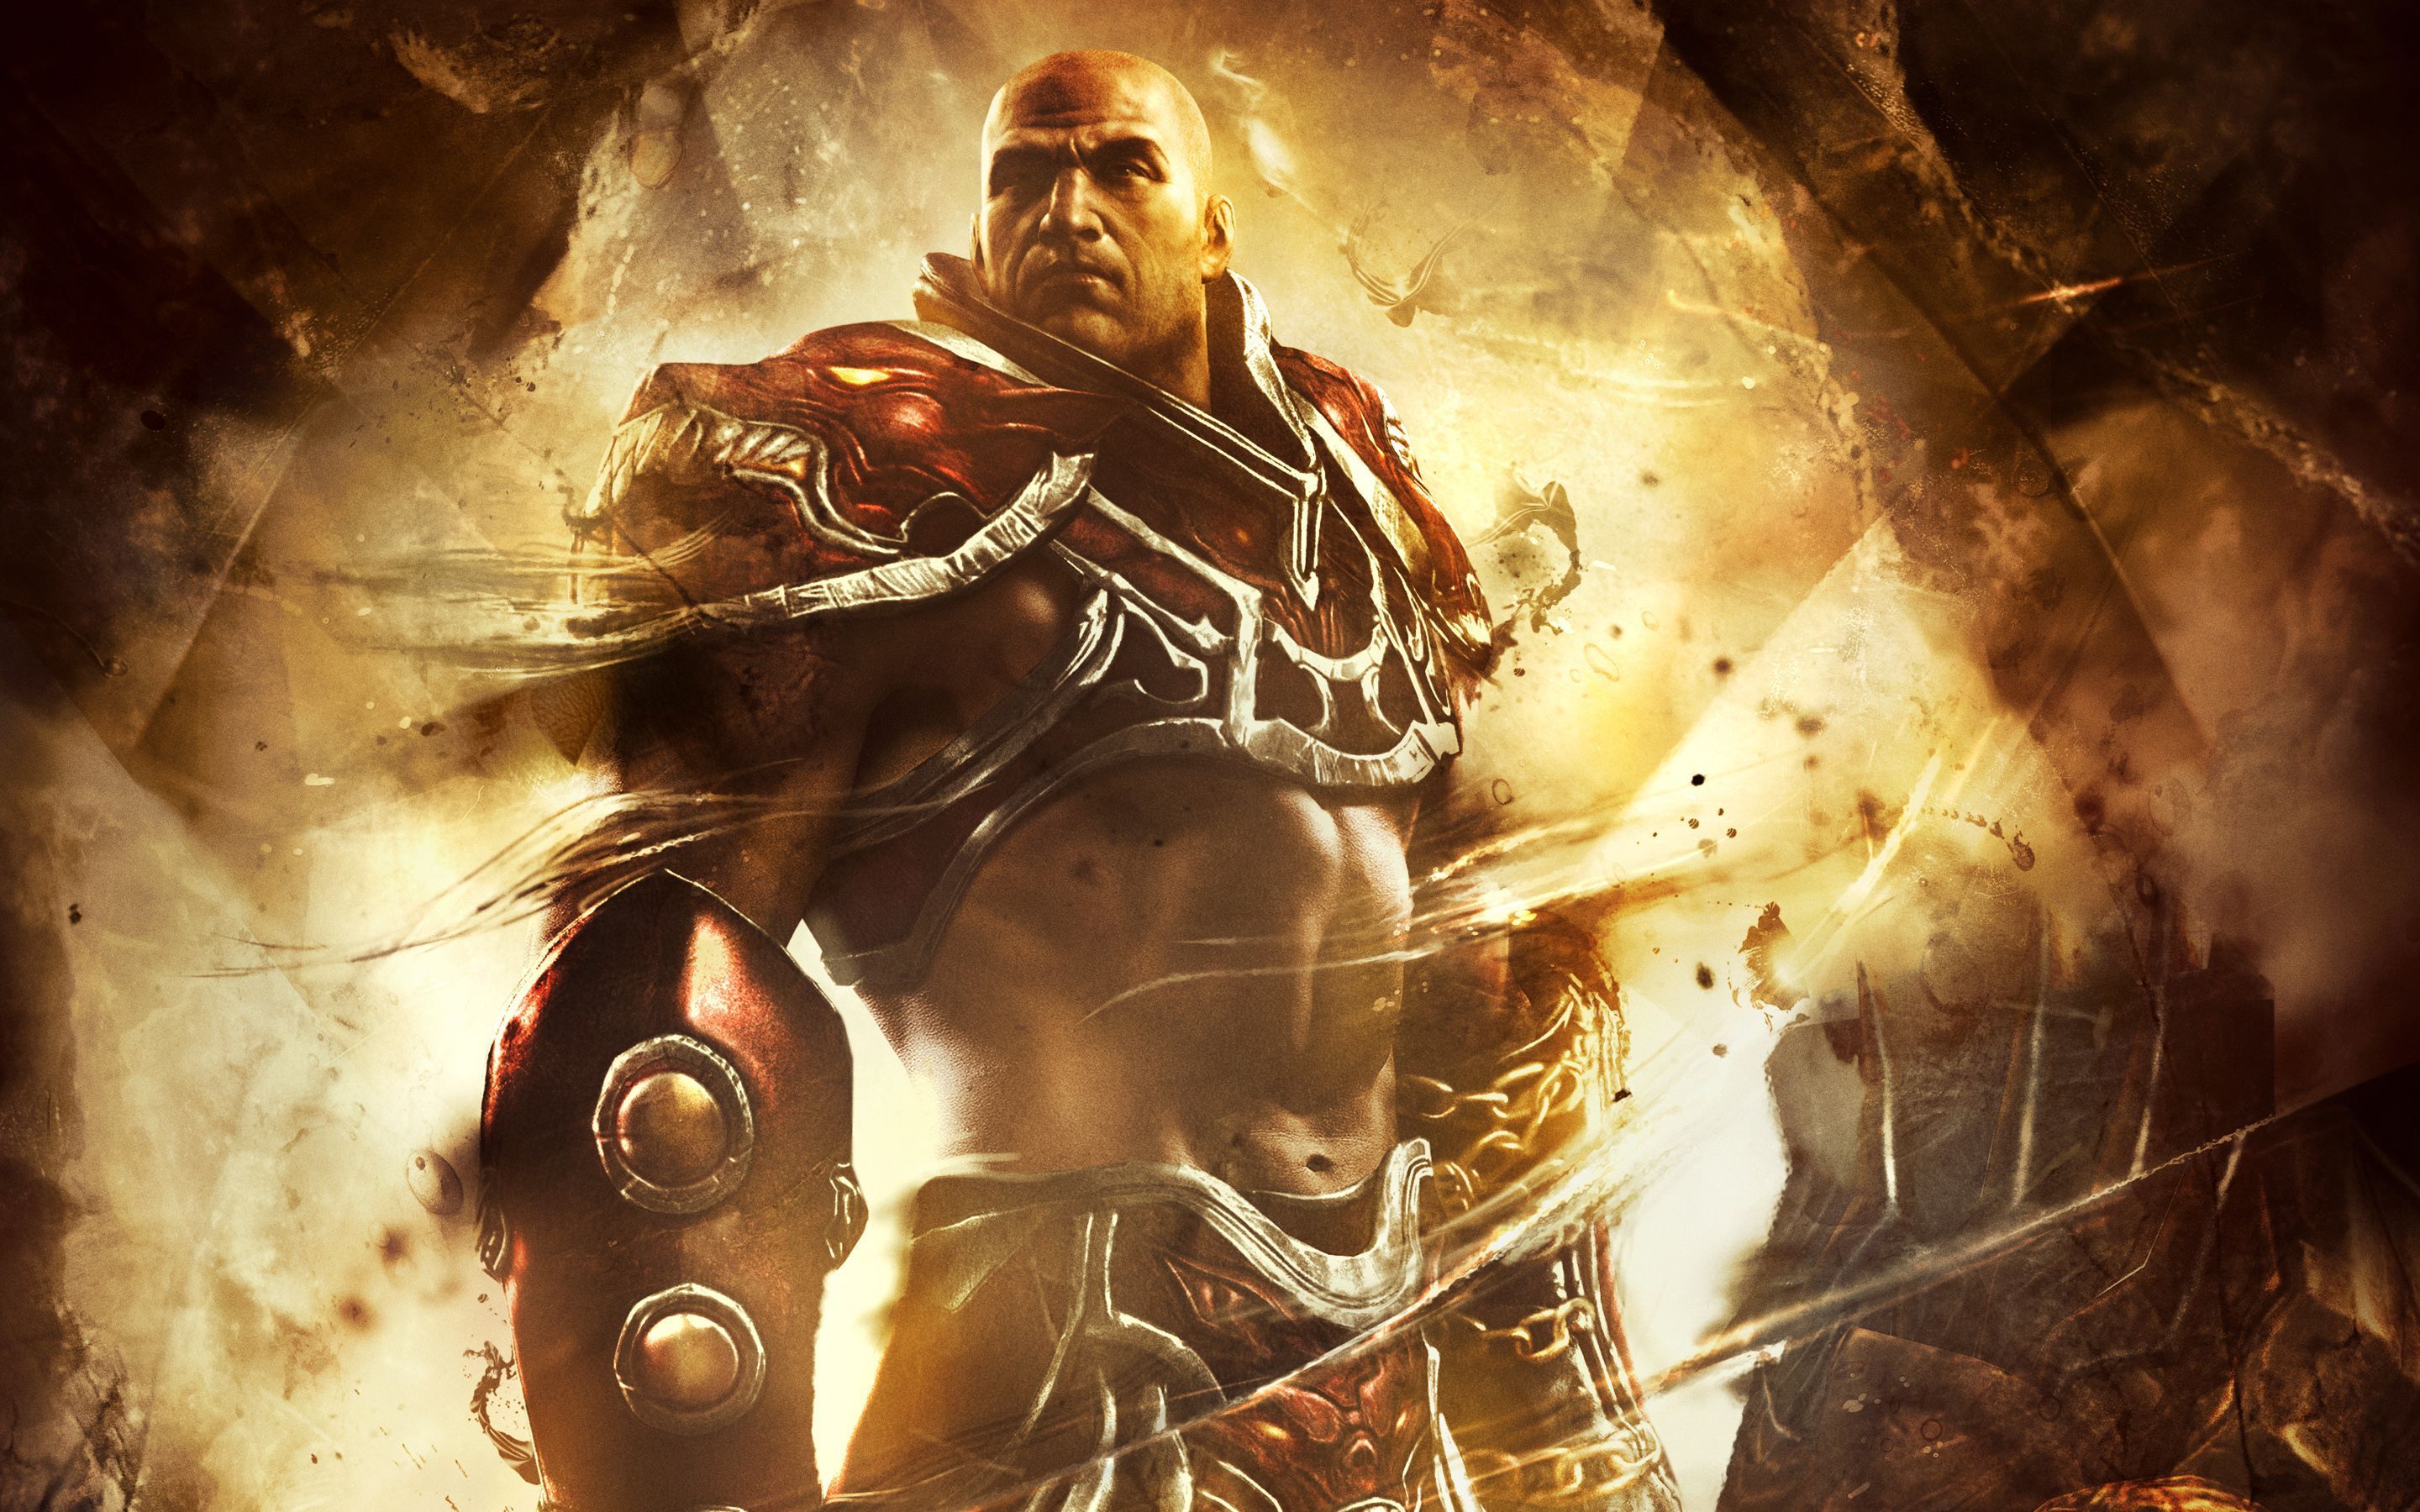 Spartan Warrior God of War Ascension Wallpapers | HD Wallpapers